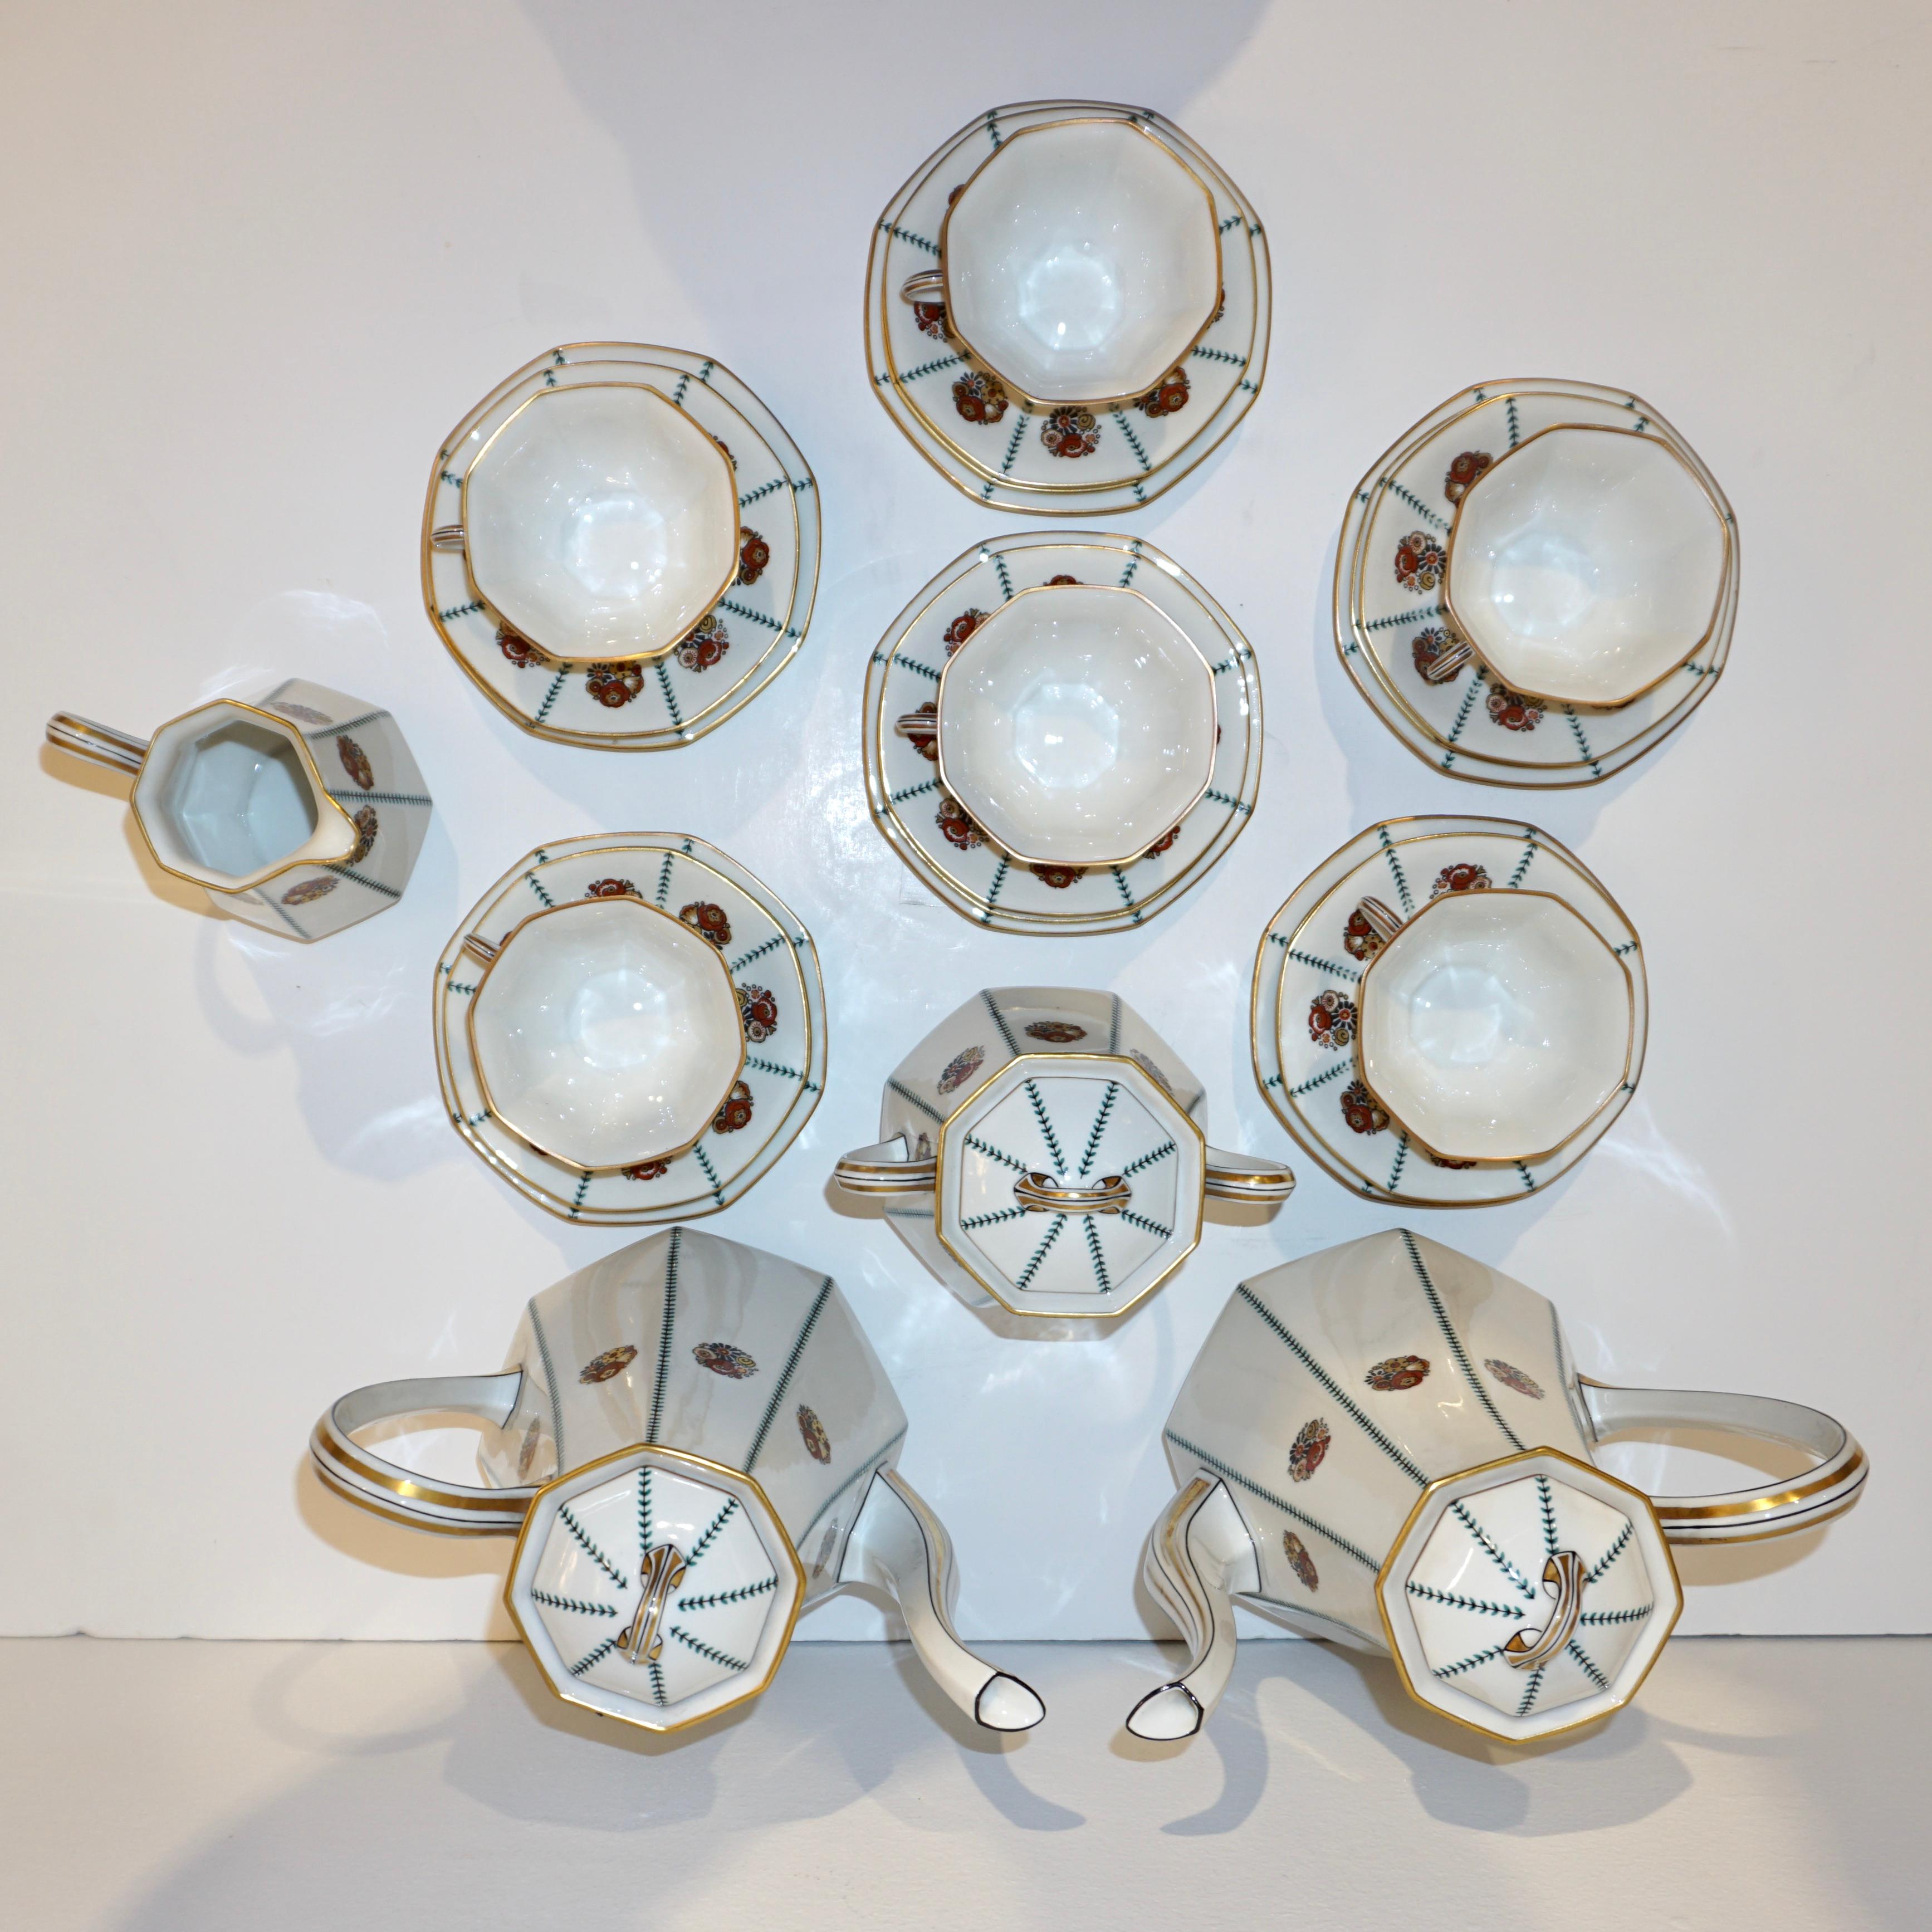 Art Deco French porcelain 28-piece set for 6, from Limoges by Balleroy Frères with dating mark. Rare set not only for the perfect condition but also for the pieces it includes: double pots for tea and/or coffee and hot water, one creamer, one sugar